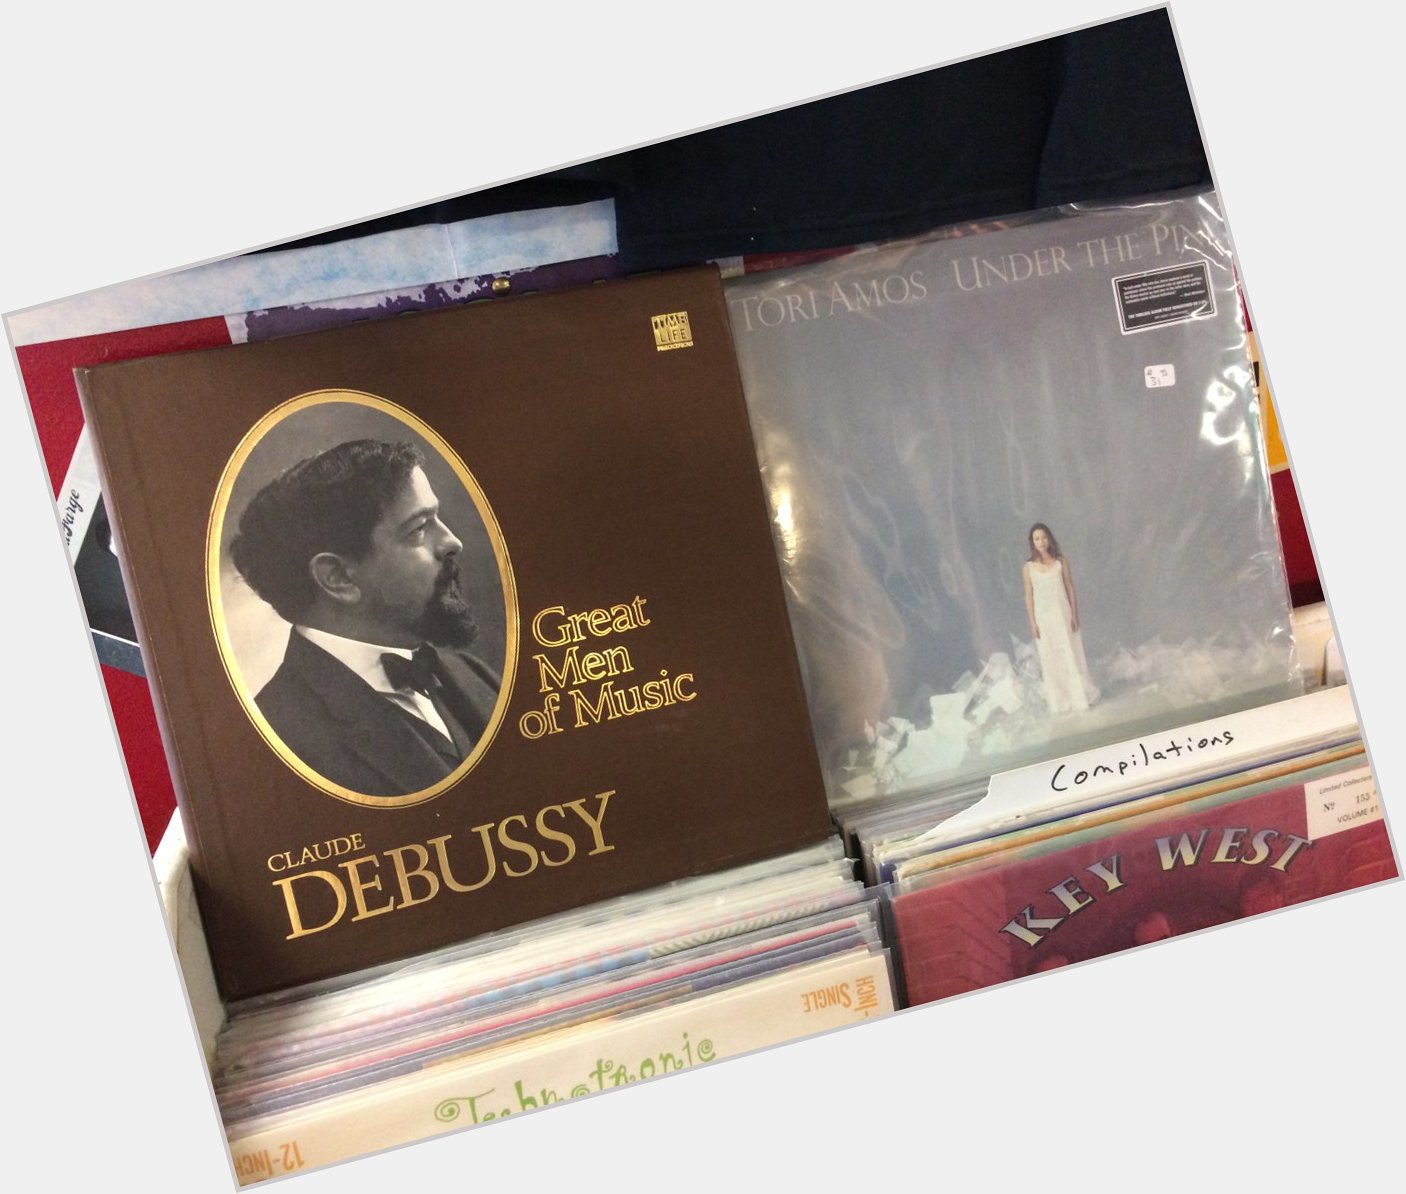 Happy Birthday to the late Claude Debussy & Tori Amos 